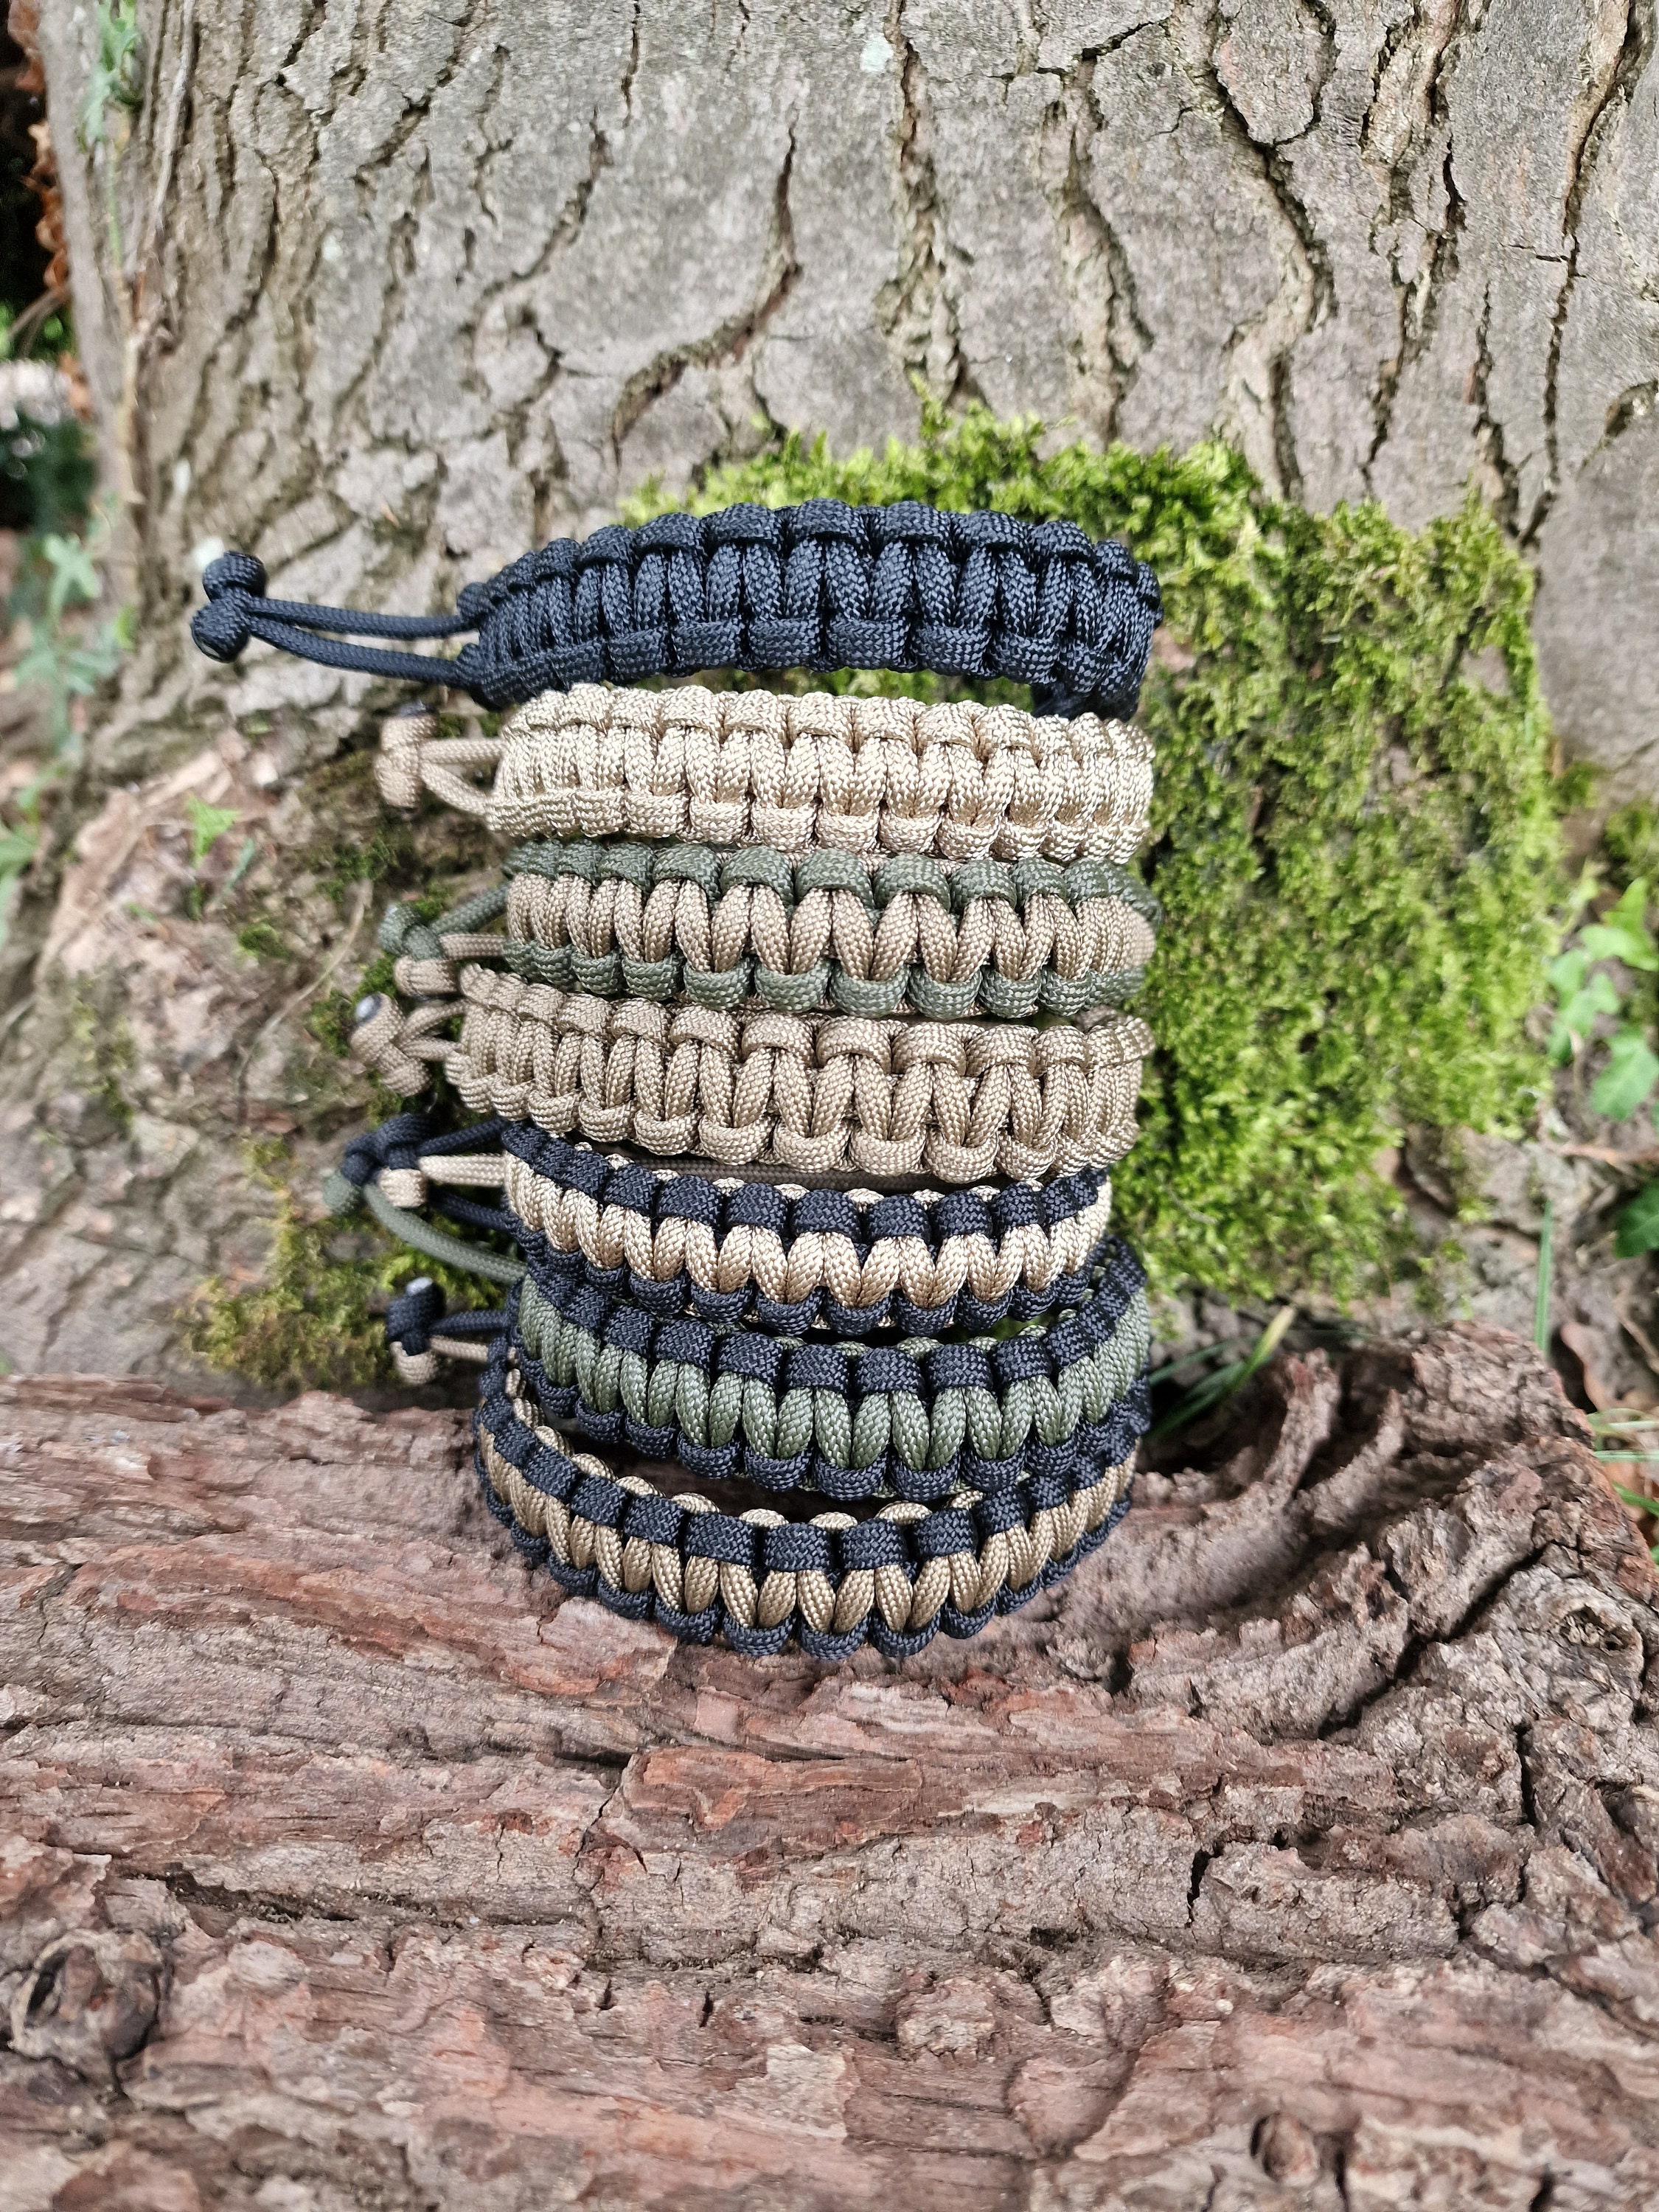 Professional Paracord Jigs Multiple Sizes and Jig Types Cord Bracelet Maker  Paracord Bracelets, Pet Collars, & More Paracord Projects 